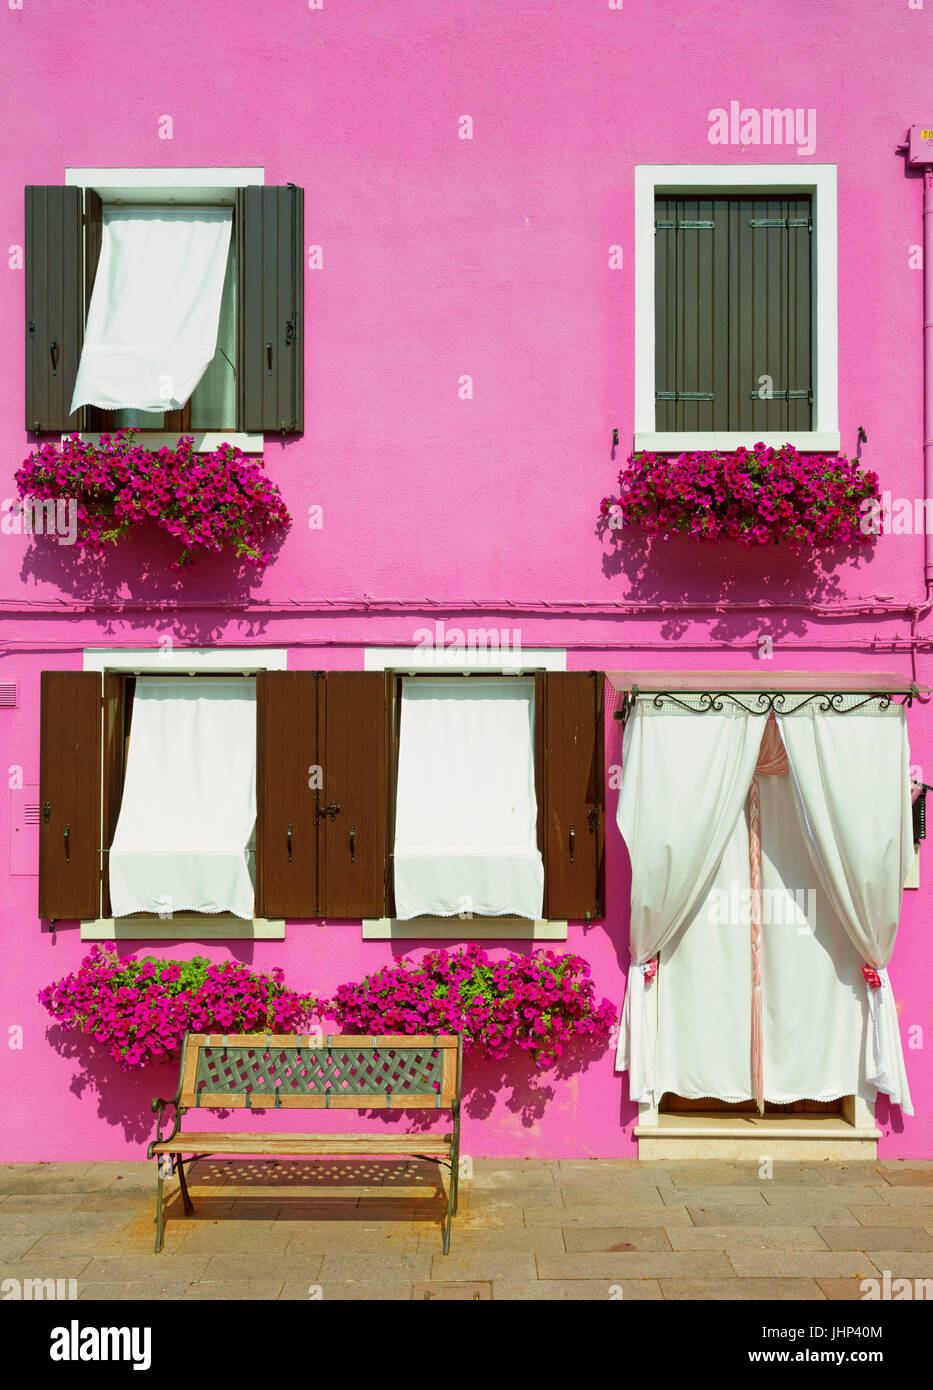 Burano, Venice/ The small yard with bright pink walls of houses Stock Photo